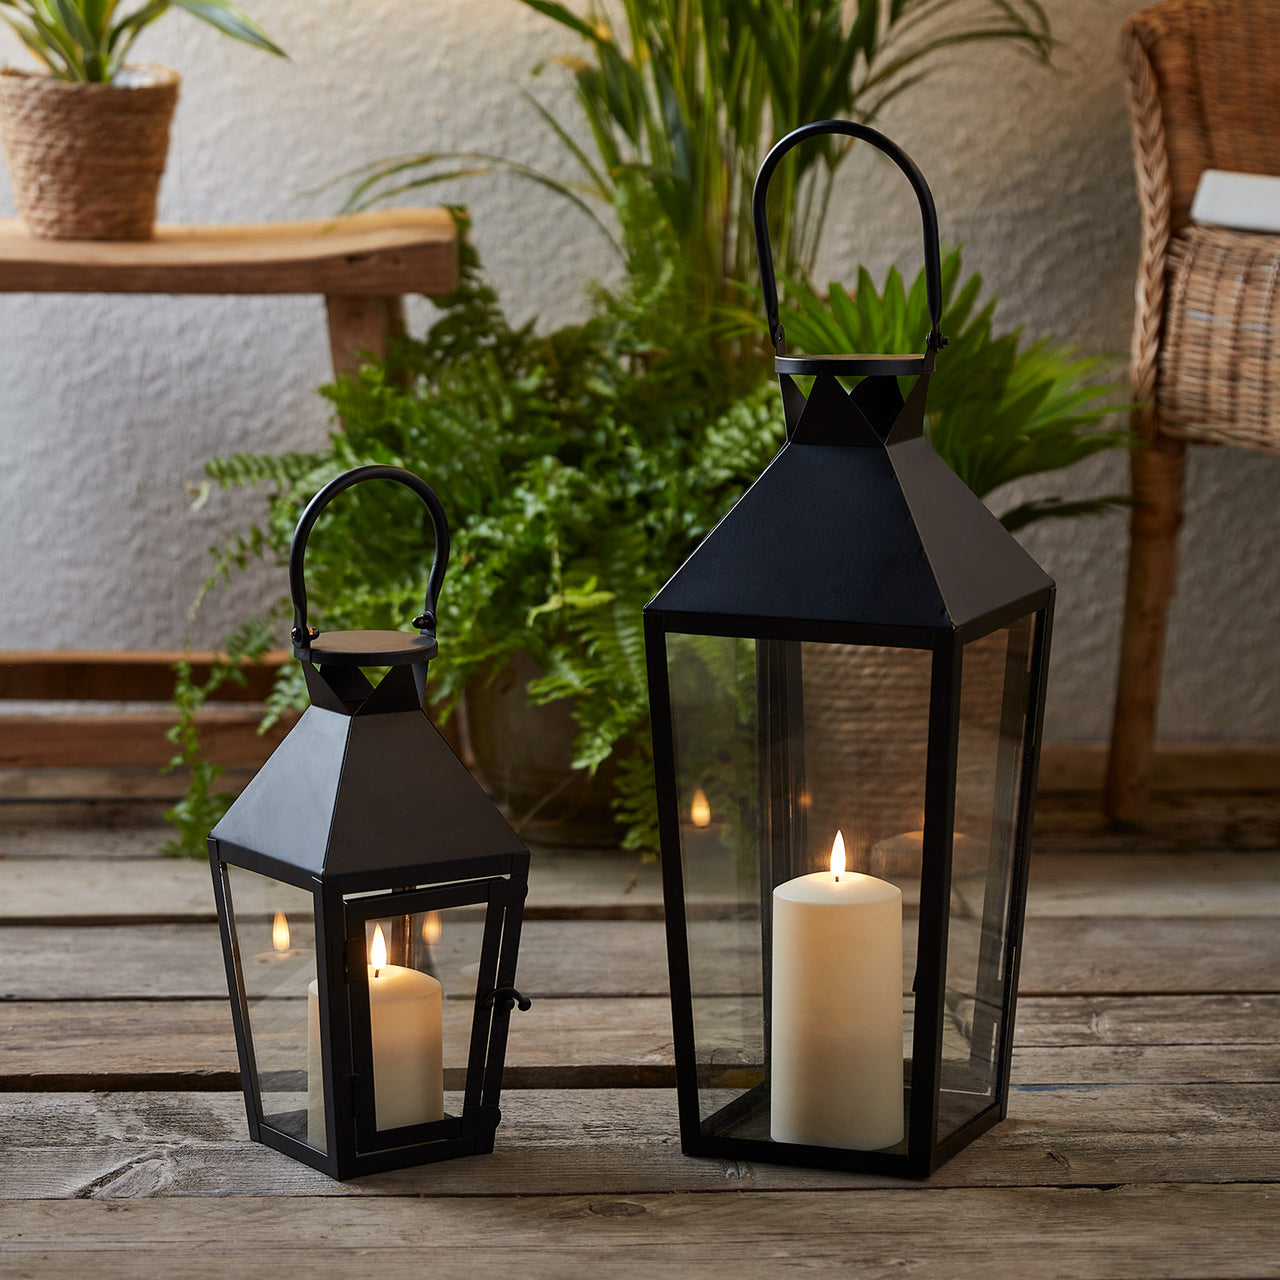 Cairns Black Garden Lantern Duo with TruGlow® Candles